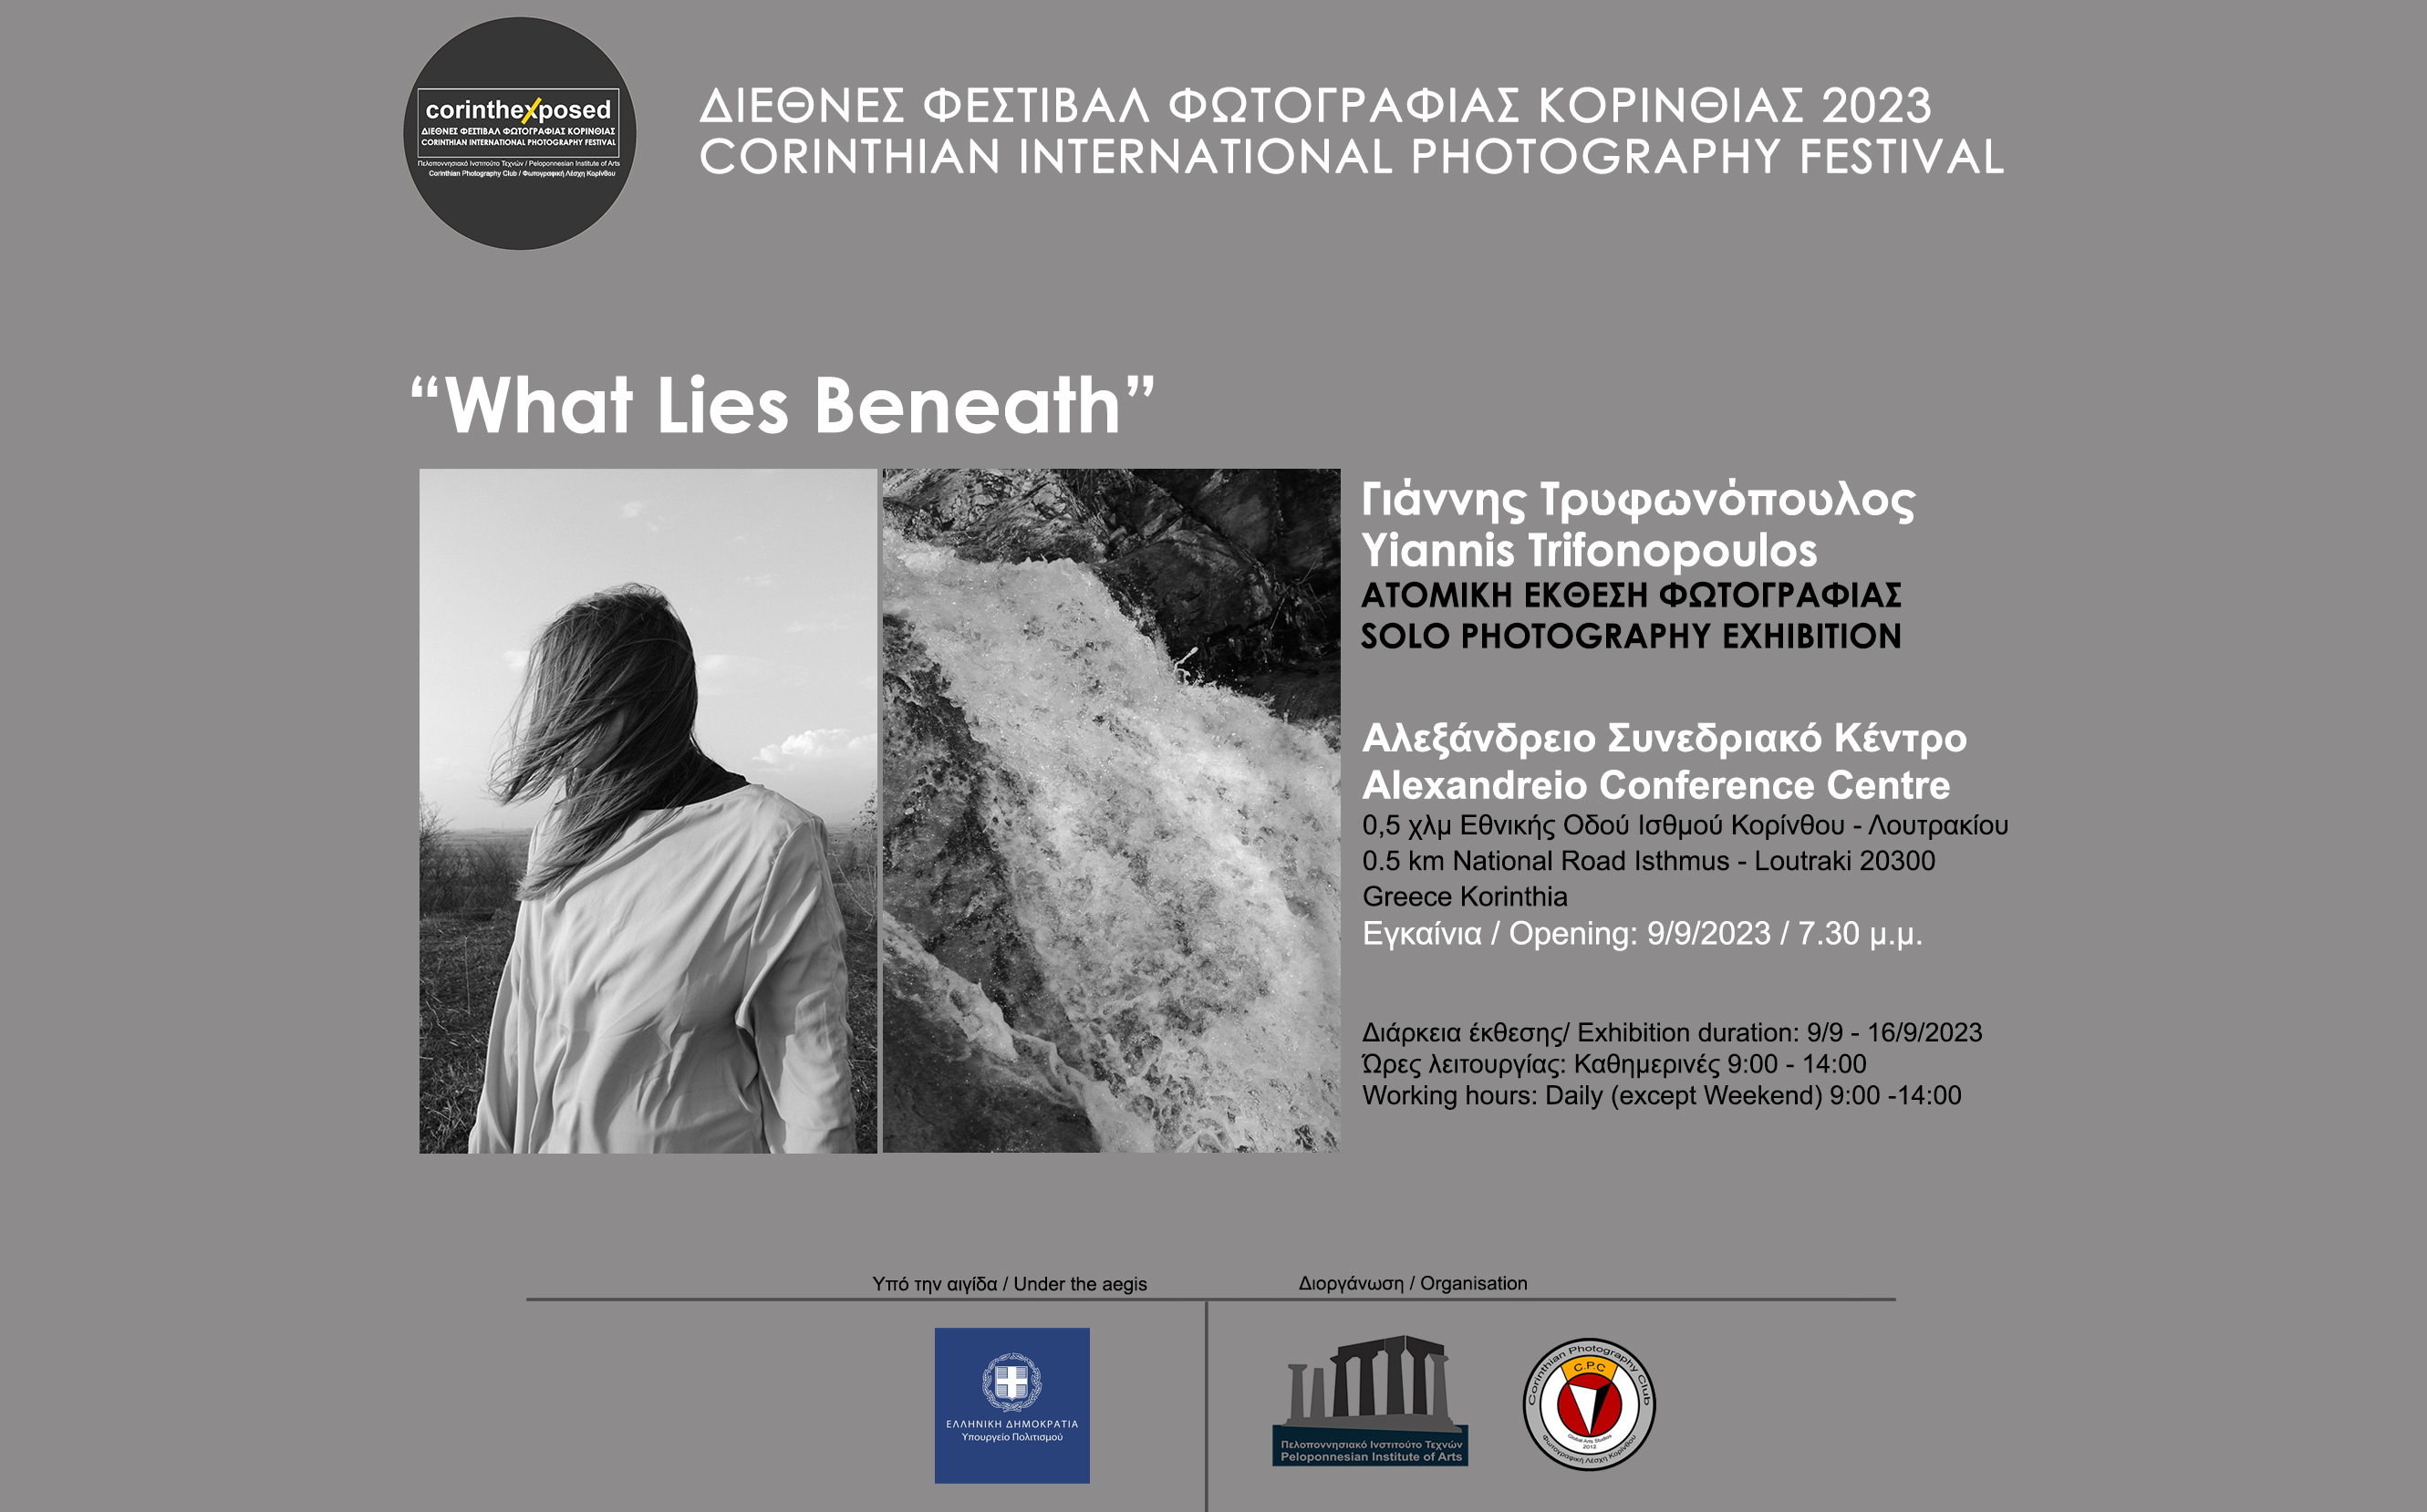 "What lies beneath" photography exhibition by Yannis Tryfonopoylos